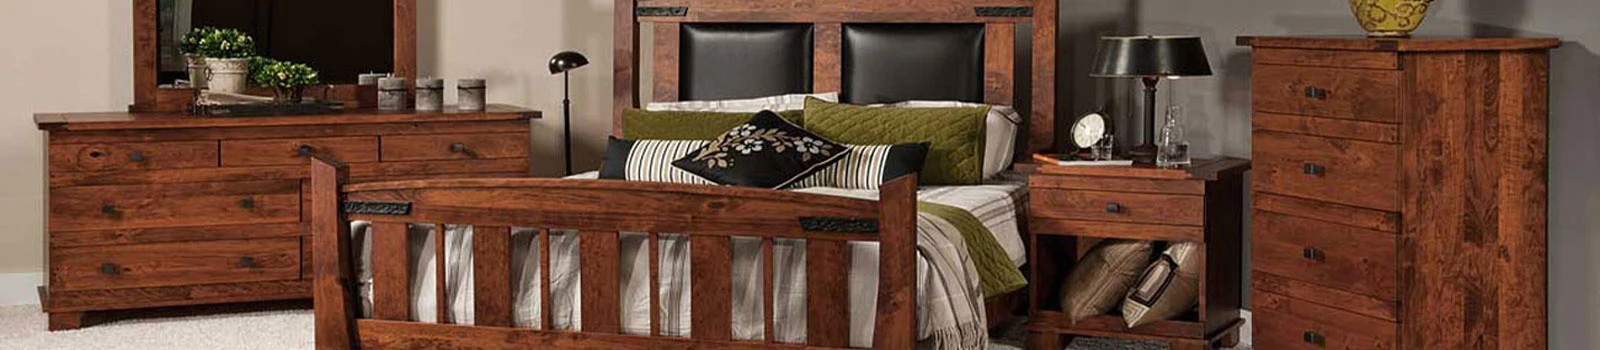 Popularly Priced amish bedroom furniture